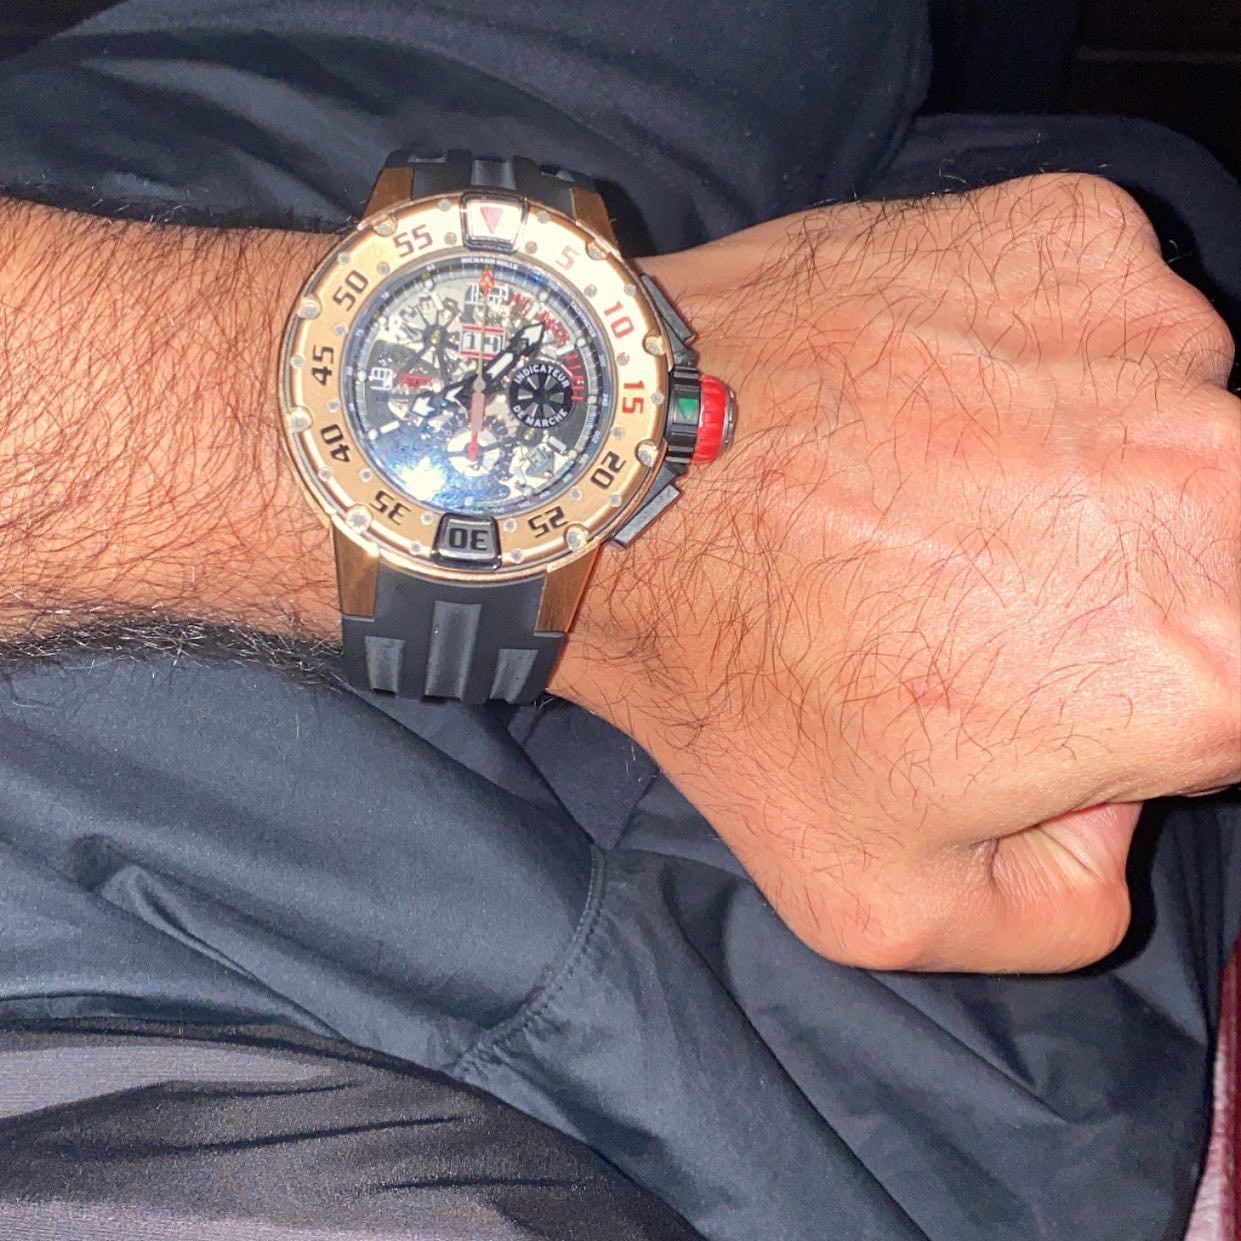 Amir Khan displays his luxury watch collection hours after three men were arrested for stealing his PS72k timepiece